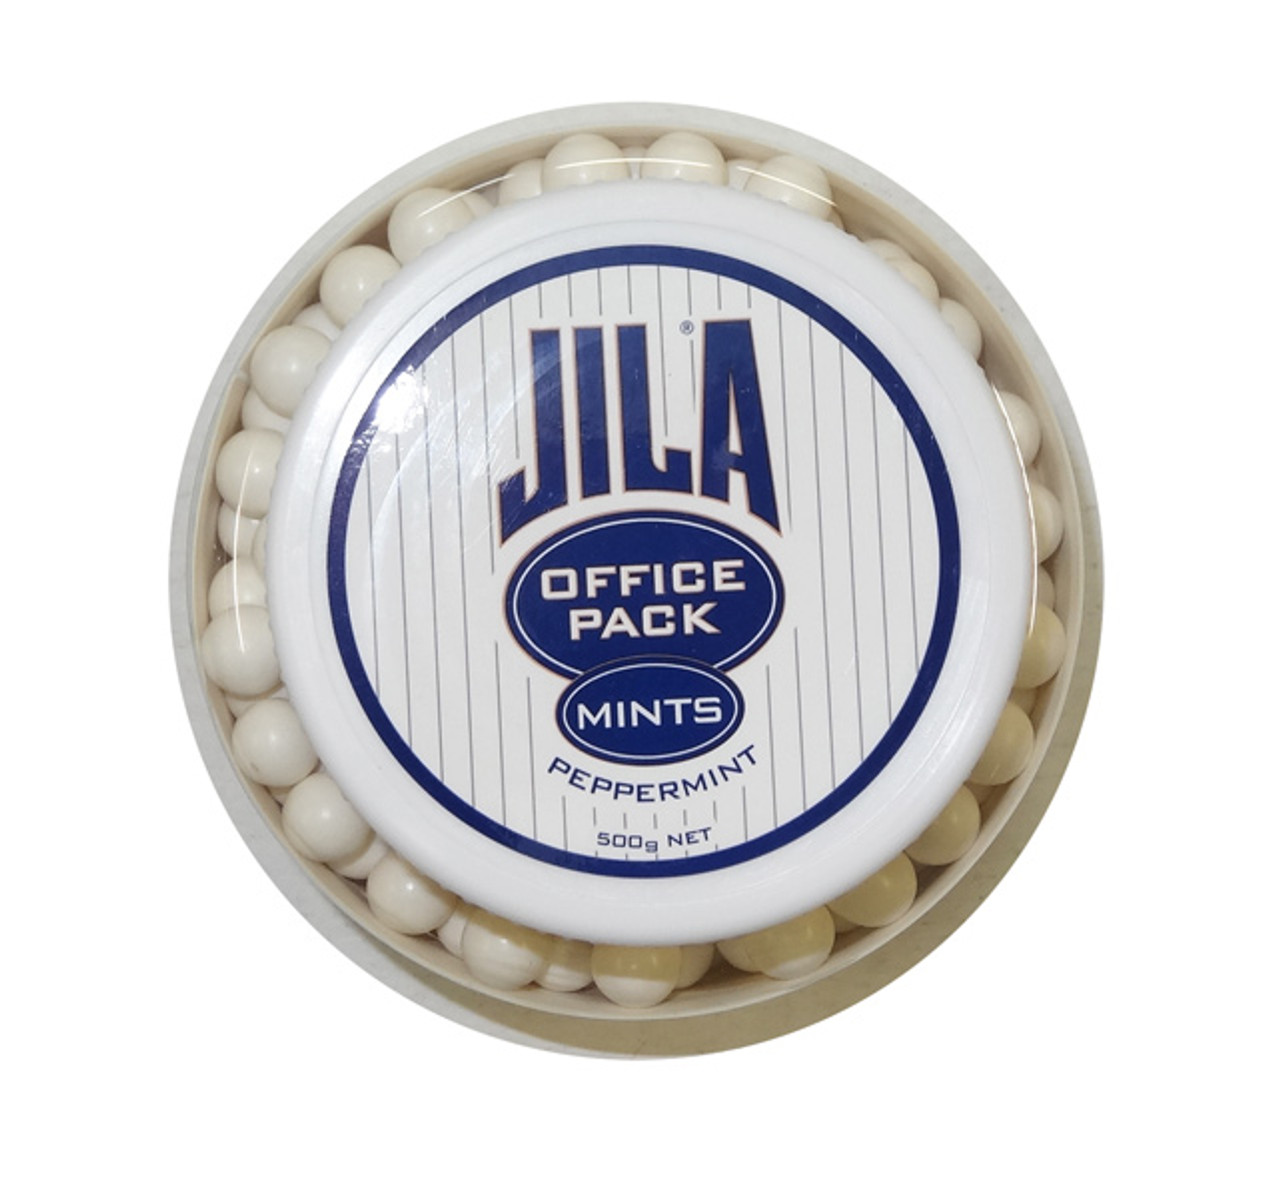 Jila Mints - Office Pack - Peppermint, and other Confectionery at  Australias lowest prices , are ready to buy at The Professors Online Lolly  Shop with the Sku: 5488